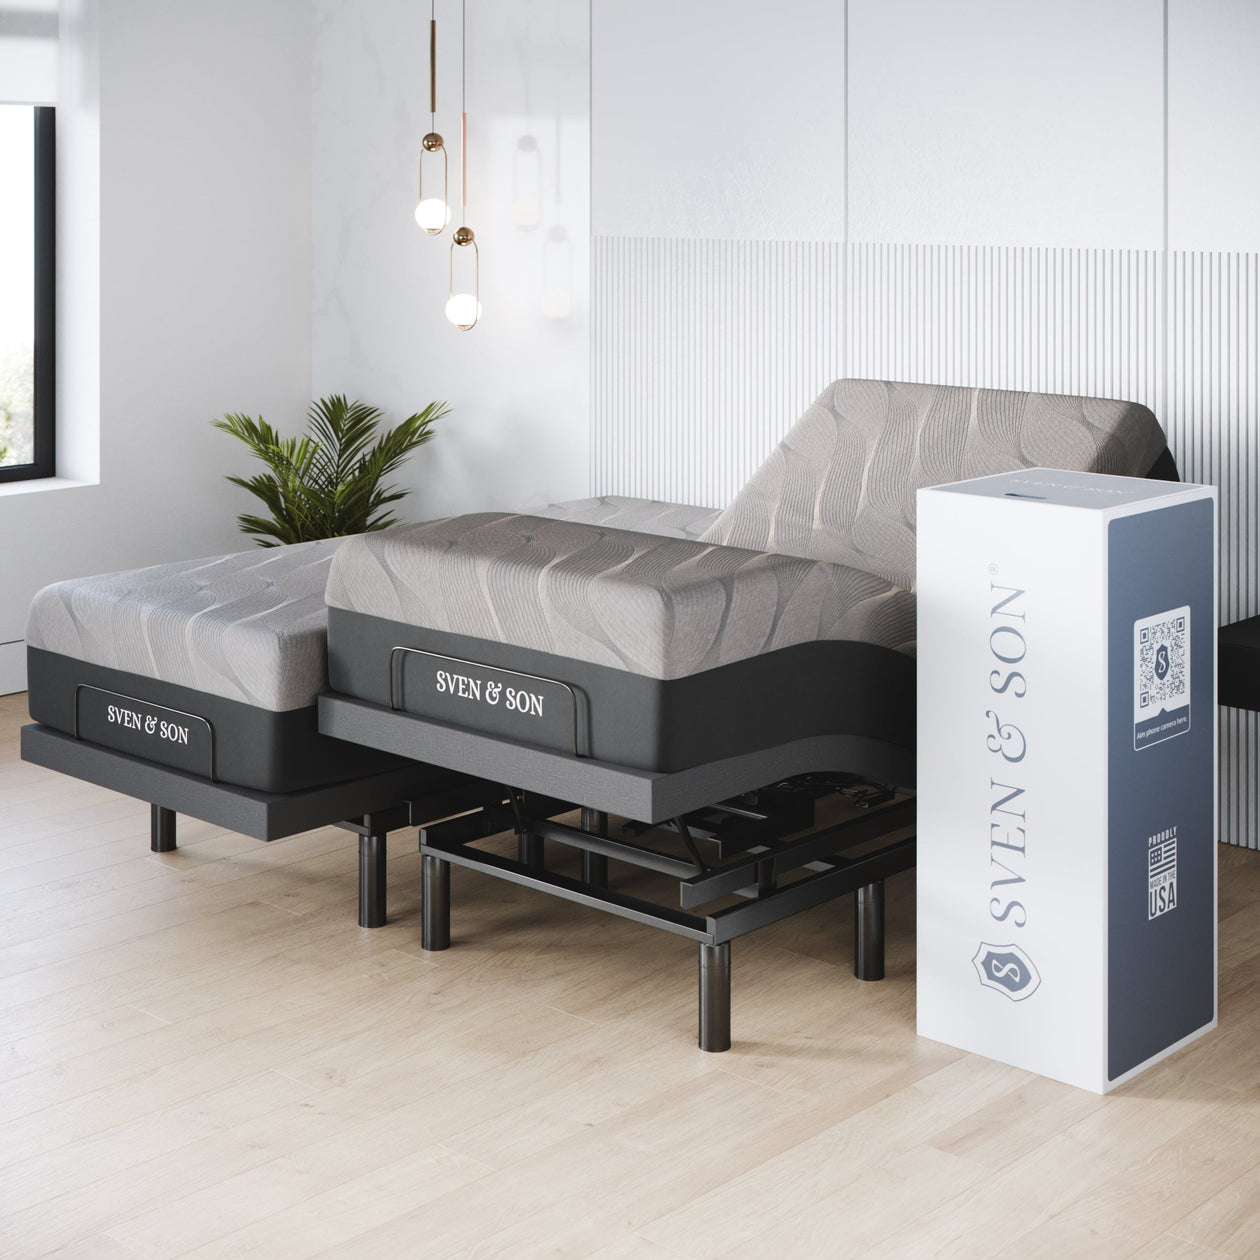 Adjustable Beds & Electric Beds, Fast Delivery